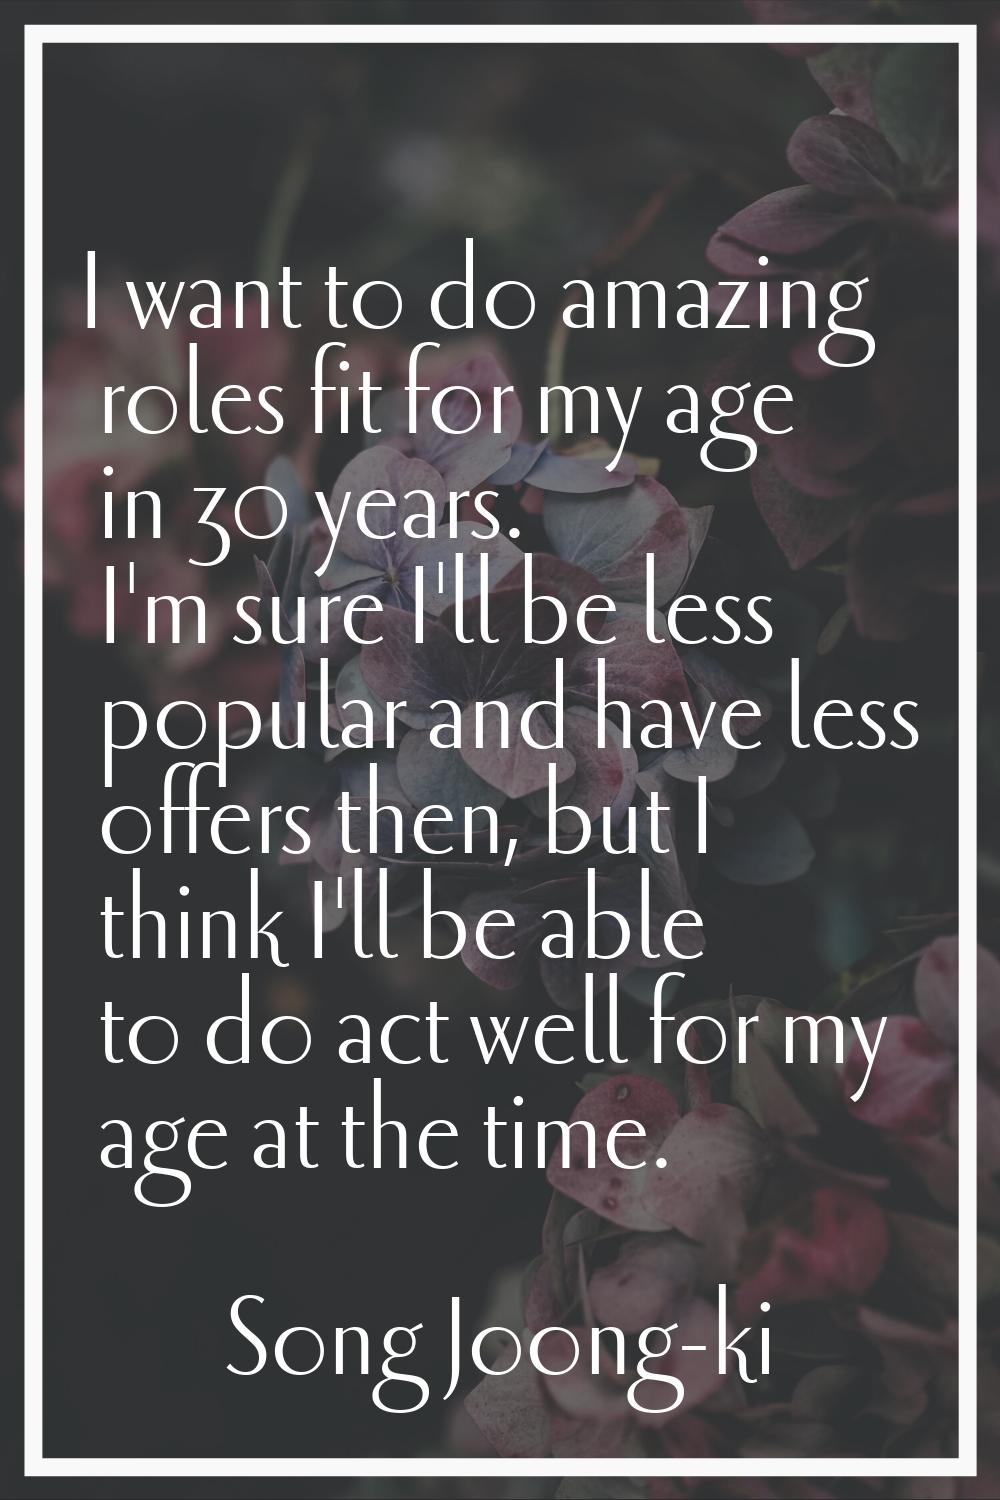 I want to do amazing roles fit for my age in 30 years. I'm sure I'll be less popular and have less 